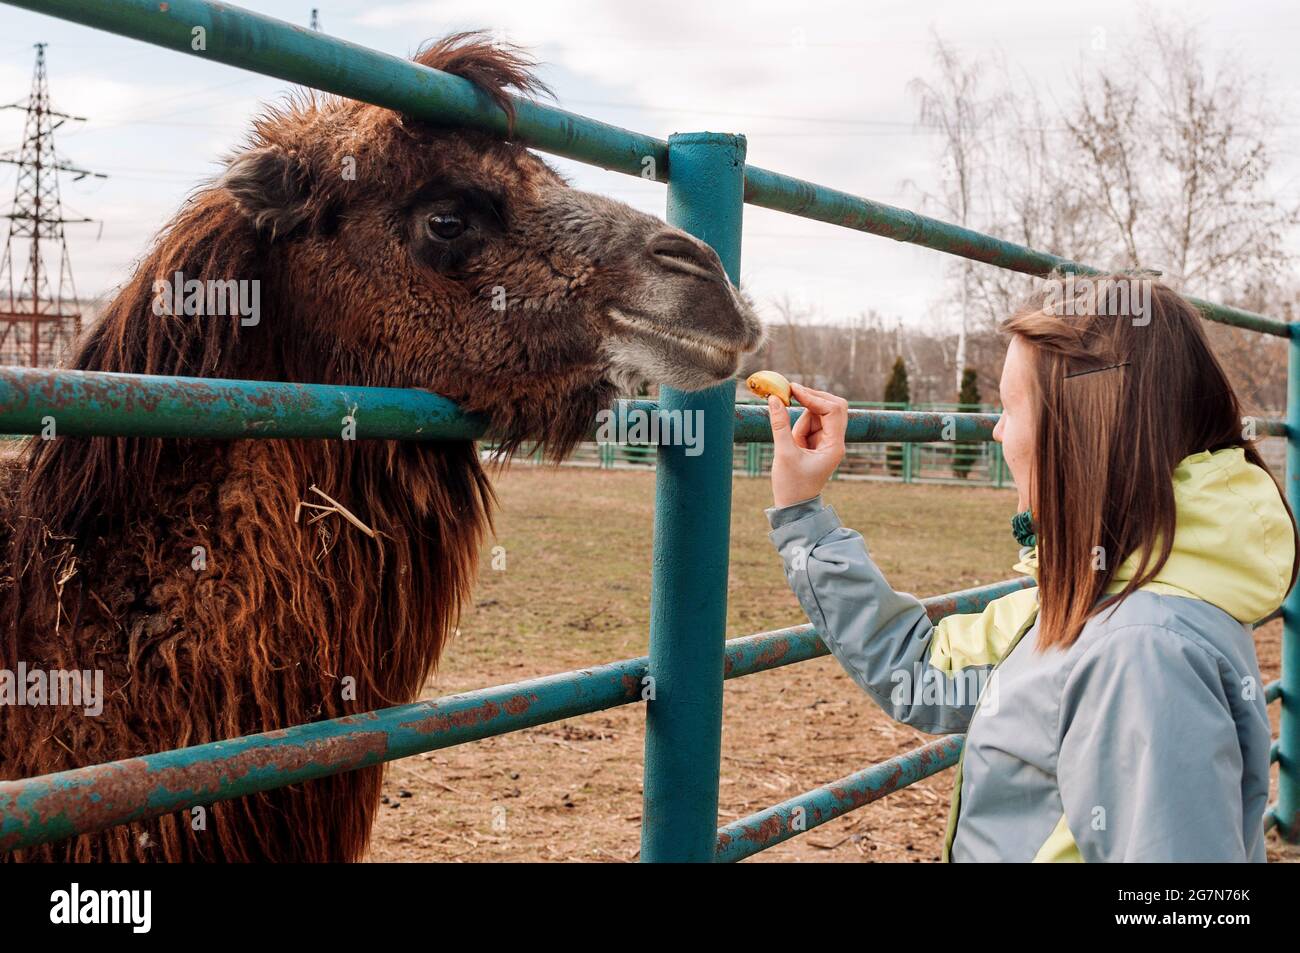 A girl feeds apples from a brown Bactrian camel. The animal is on the farm at the zoo. Camelus bactrianus, a large ungulate animal that lives in the Stock Photo